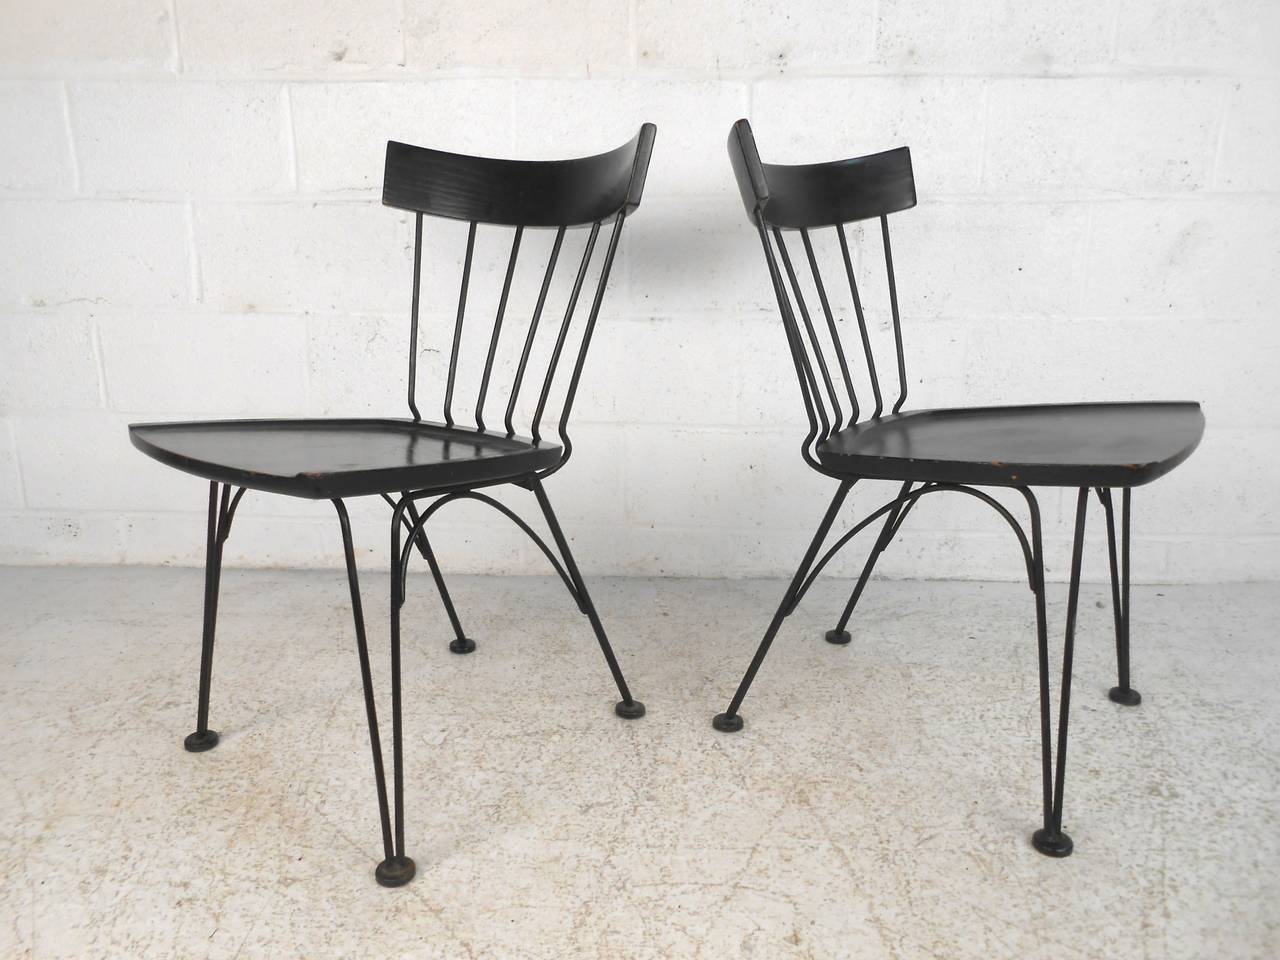 Combining wrought iron frames with sculpted wood seats and backs. Uncommon black finish go well with the sturdy black frames for a sleek modern look. Lee Woodard gives attention to detail in the smooth lines throughout the iron frame, including the